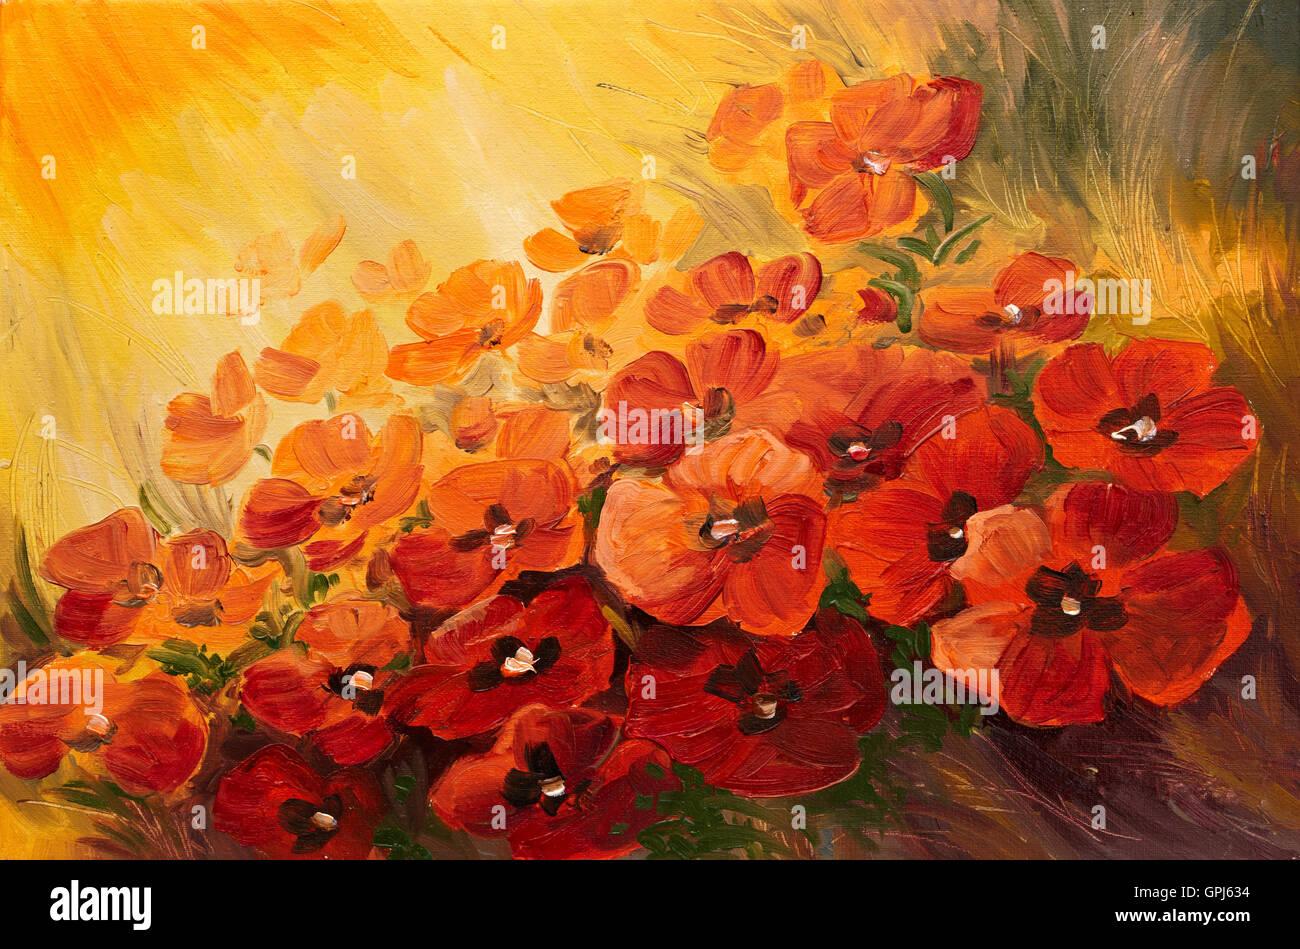 Oil Painting Abstract Illustration Of Poppies On A Red Yellow